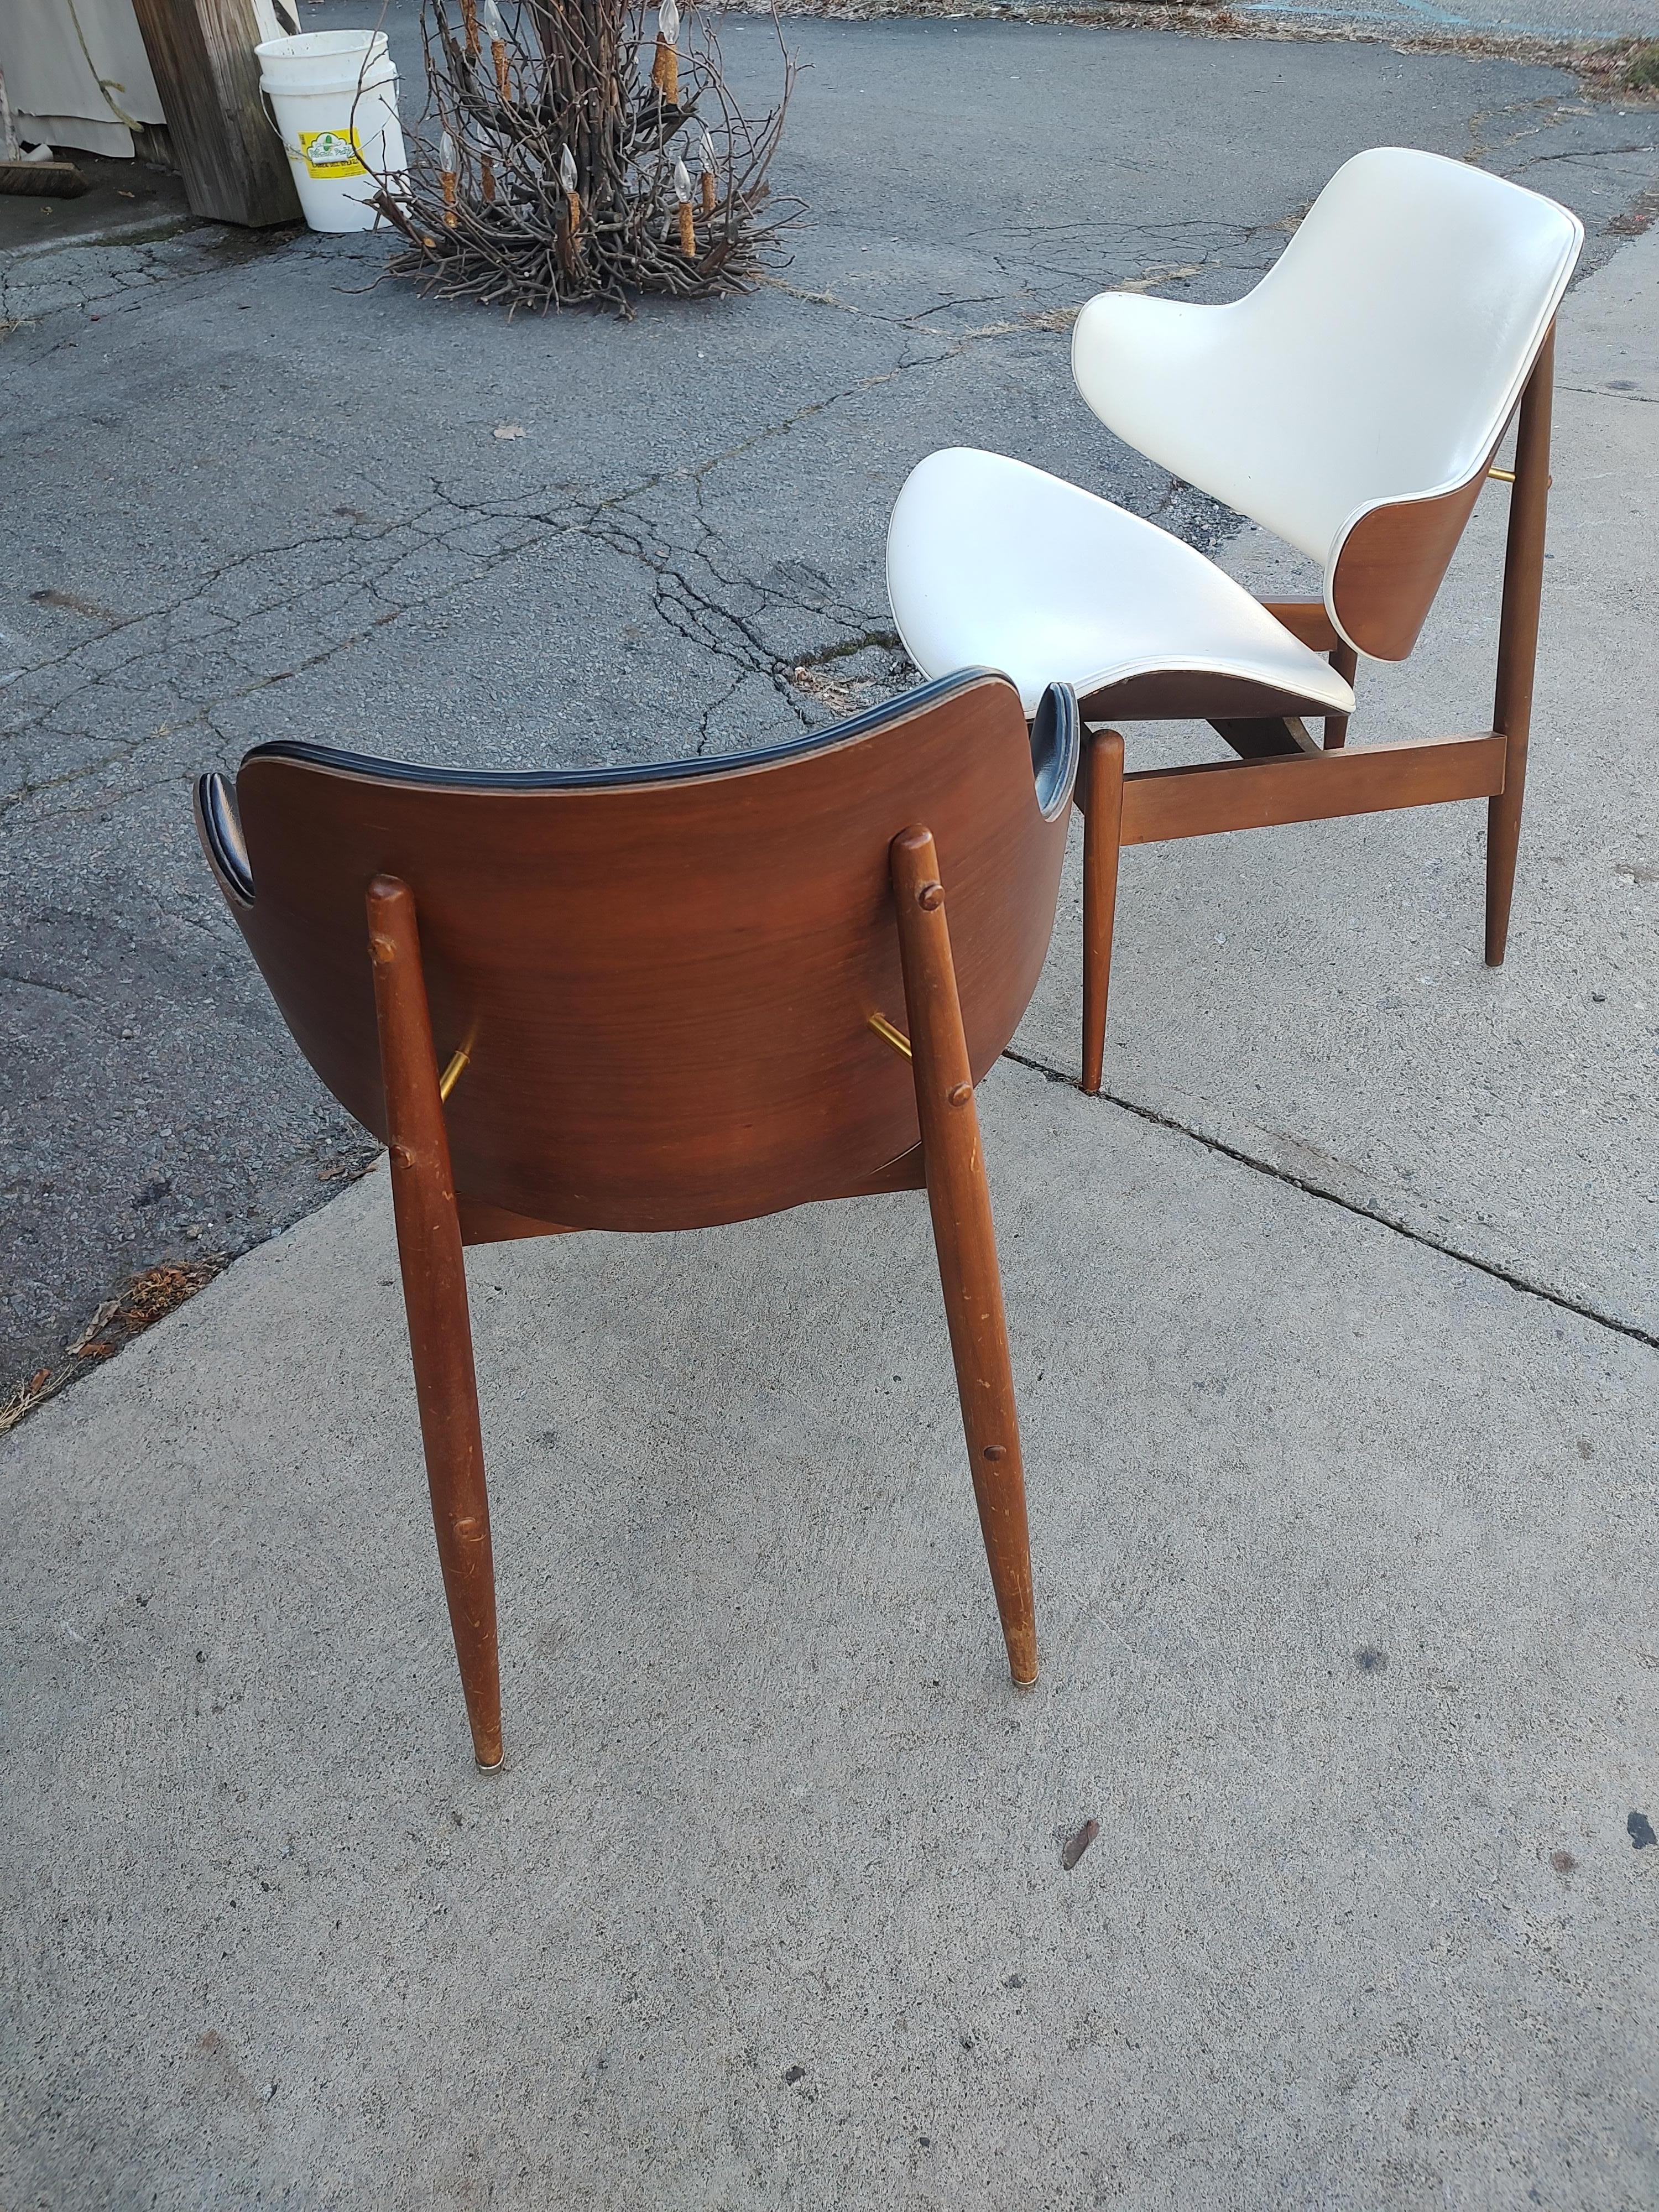 Mid-20th Century Mid Century Modern Kodawood Clam Shell Chairs by Seymour James Wiener For Sale